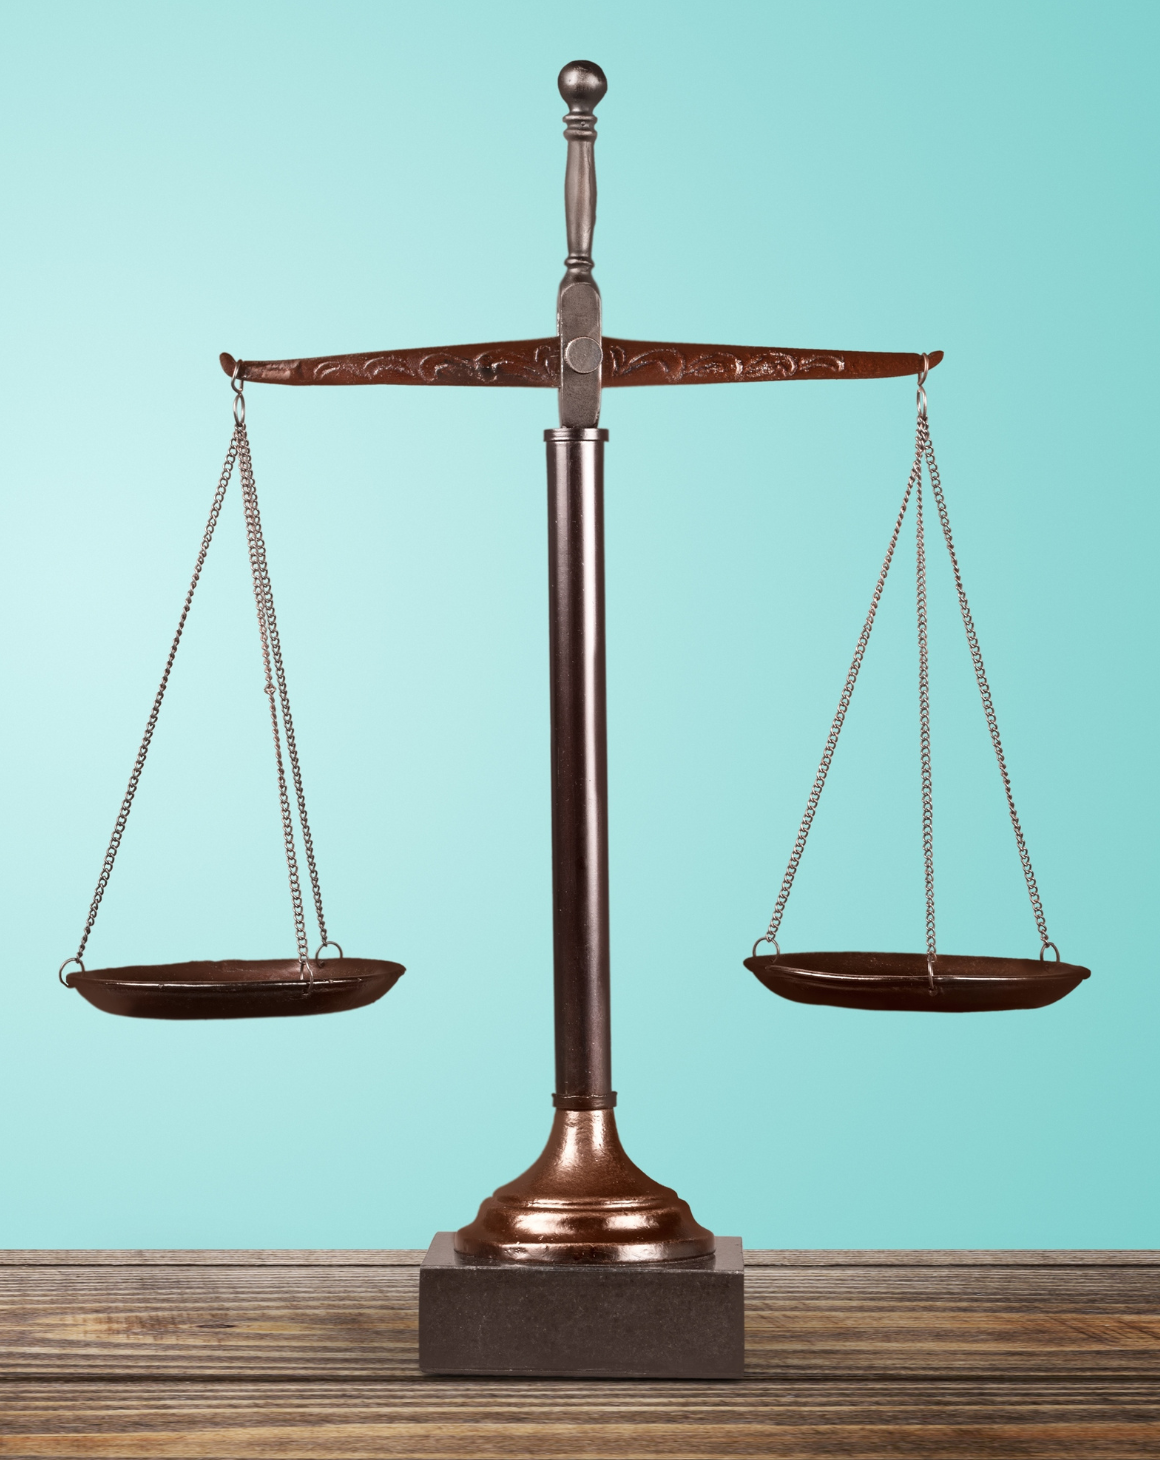 A justice scale standing on a desk